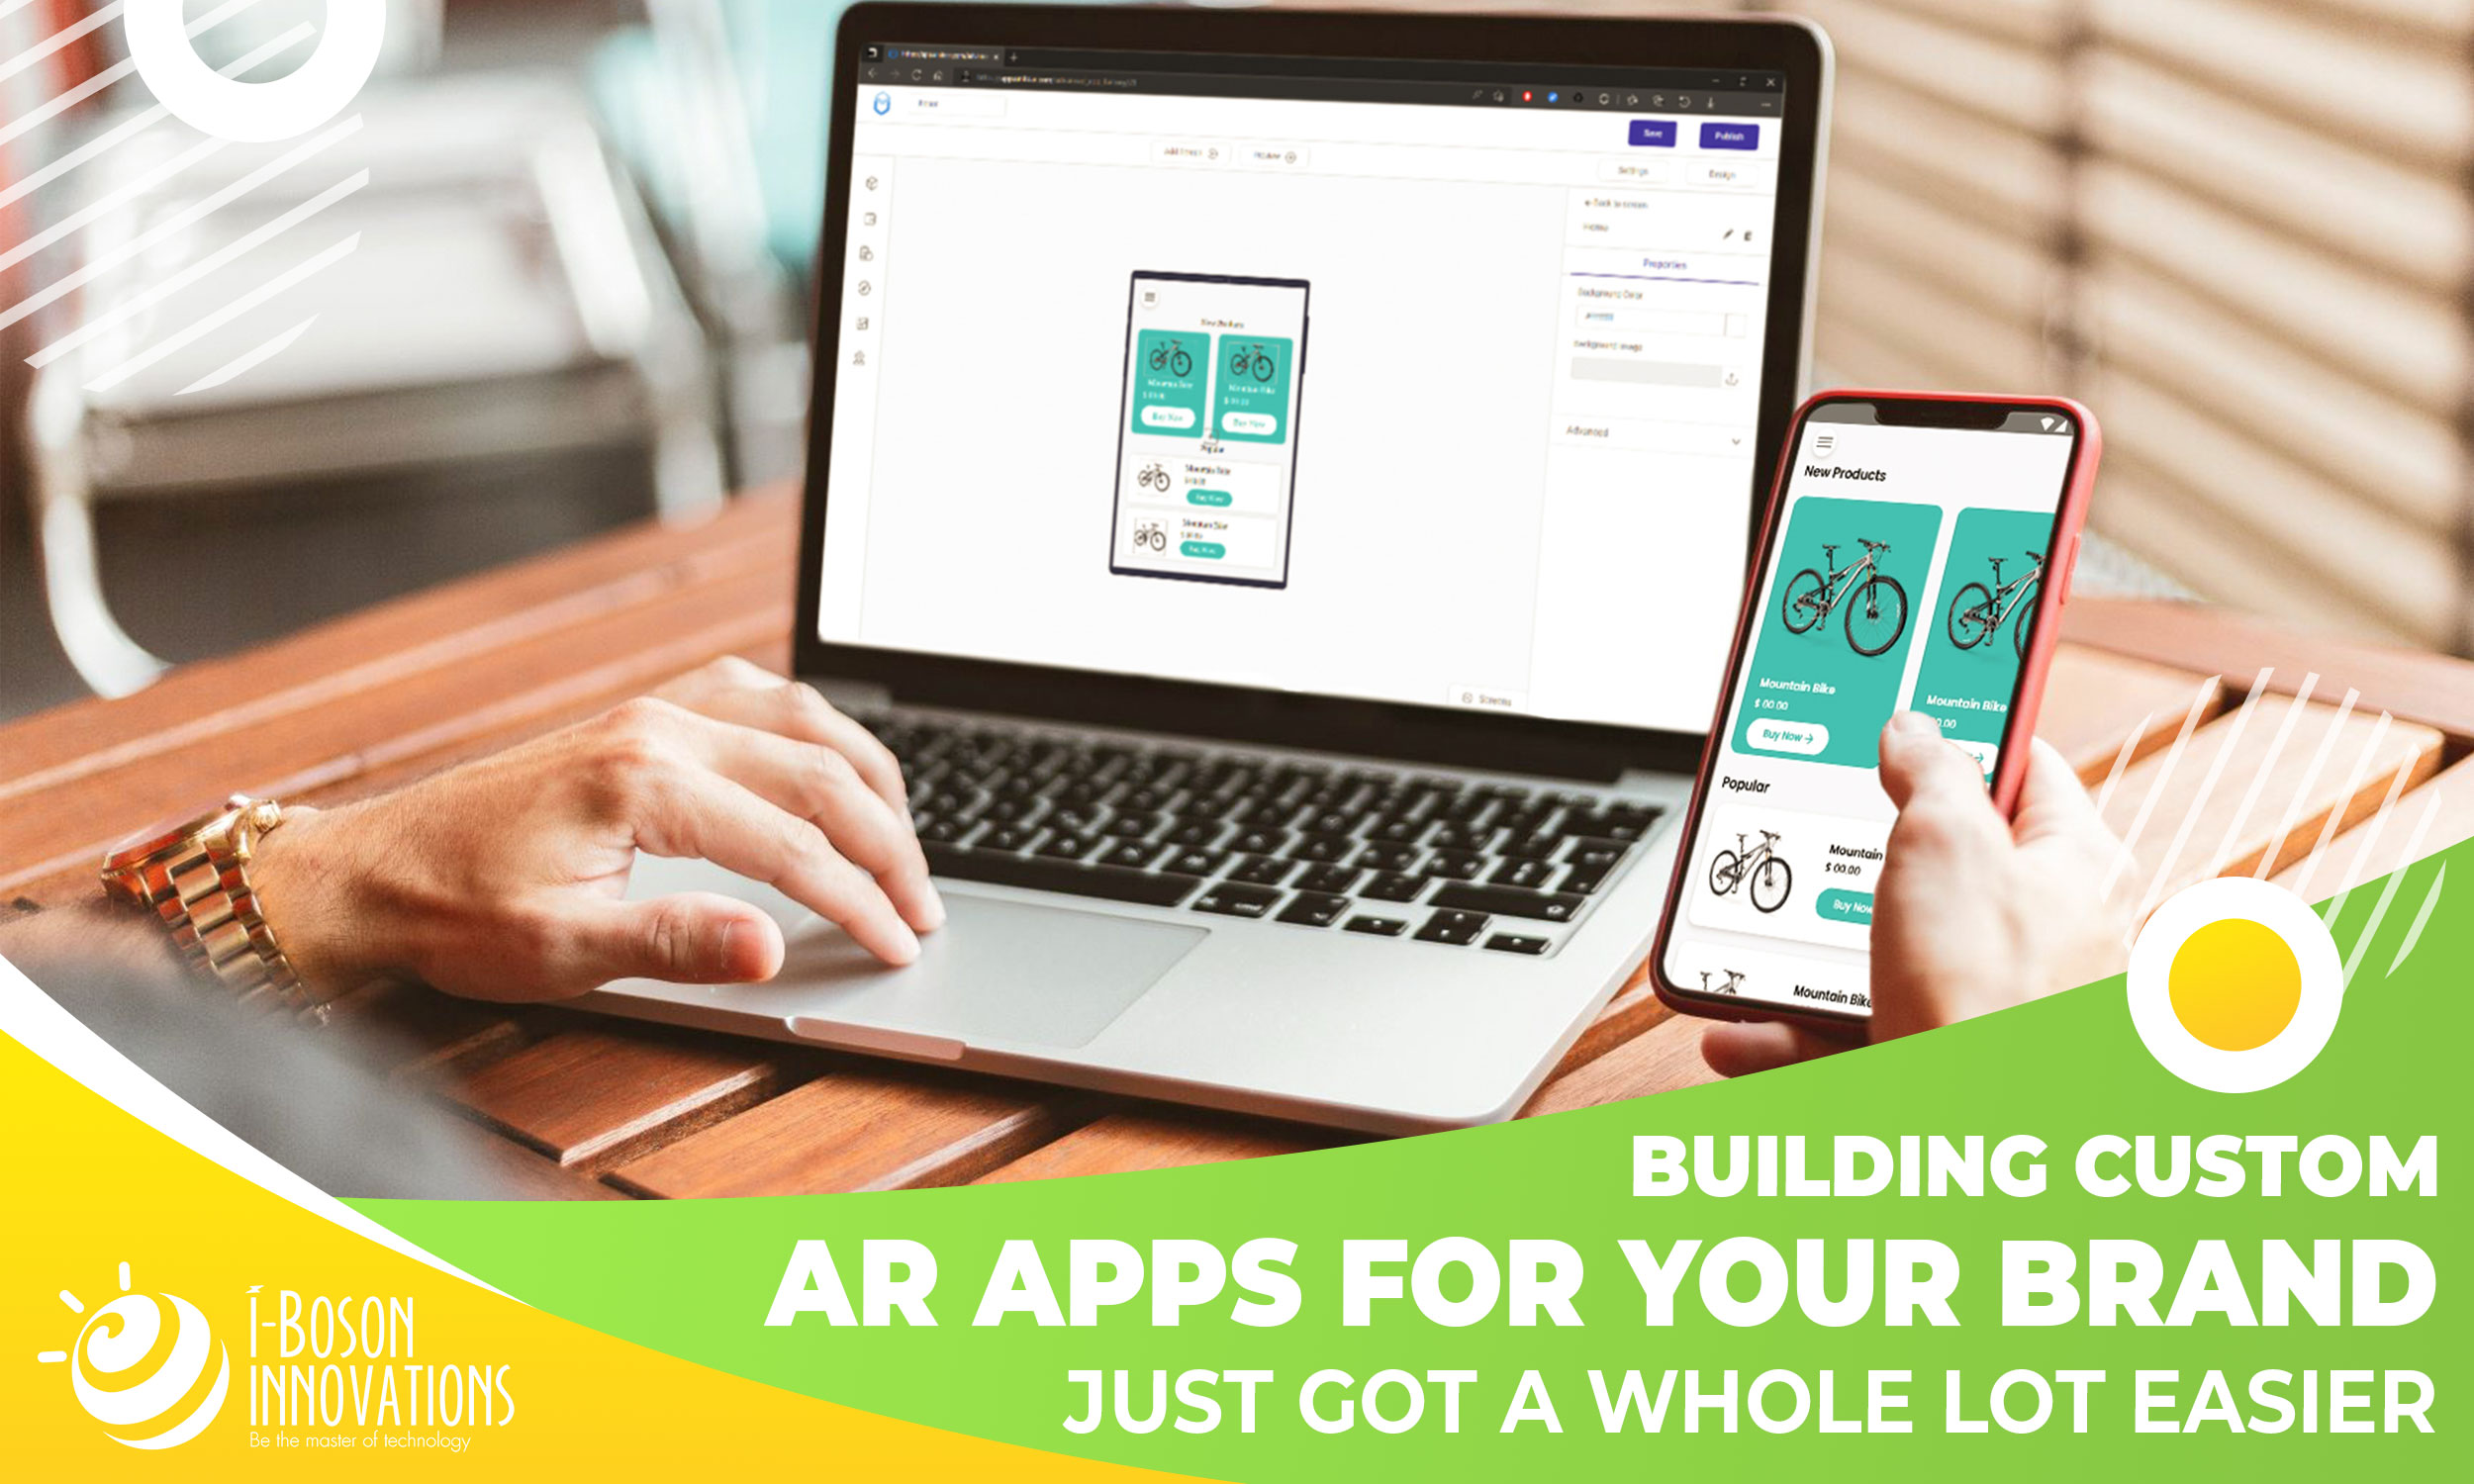 Building custom AR apps for your brand just got a whole lot easier